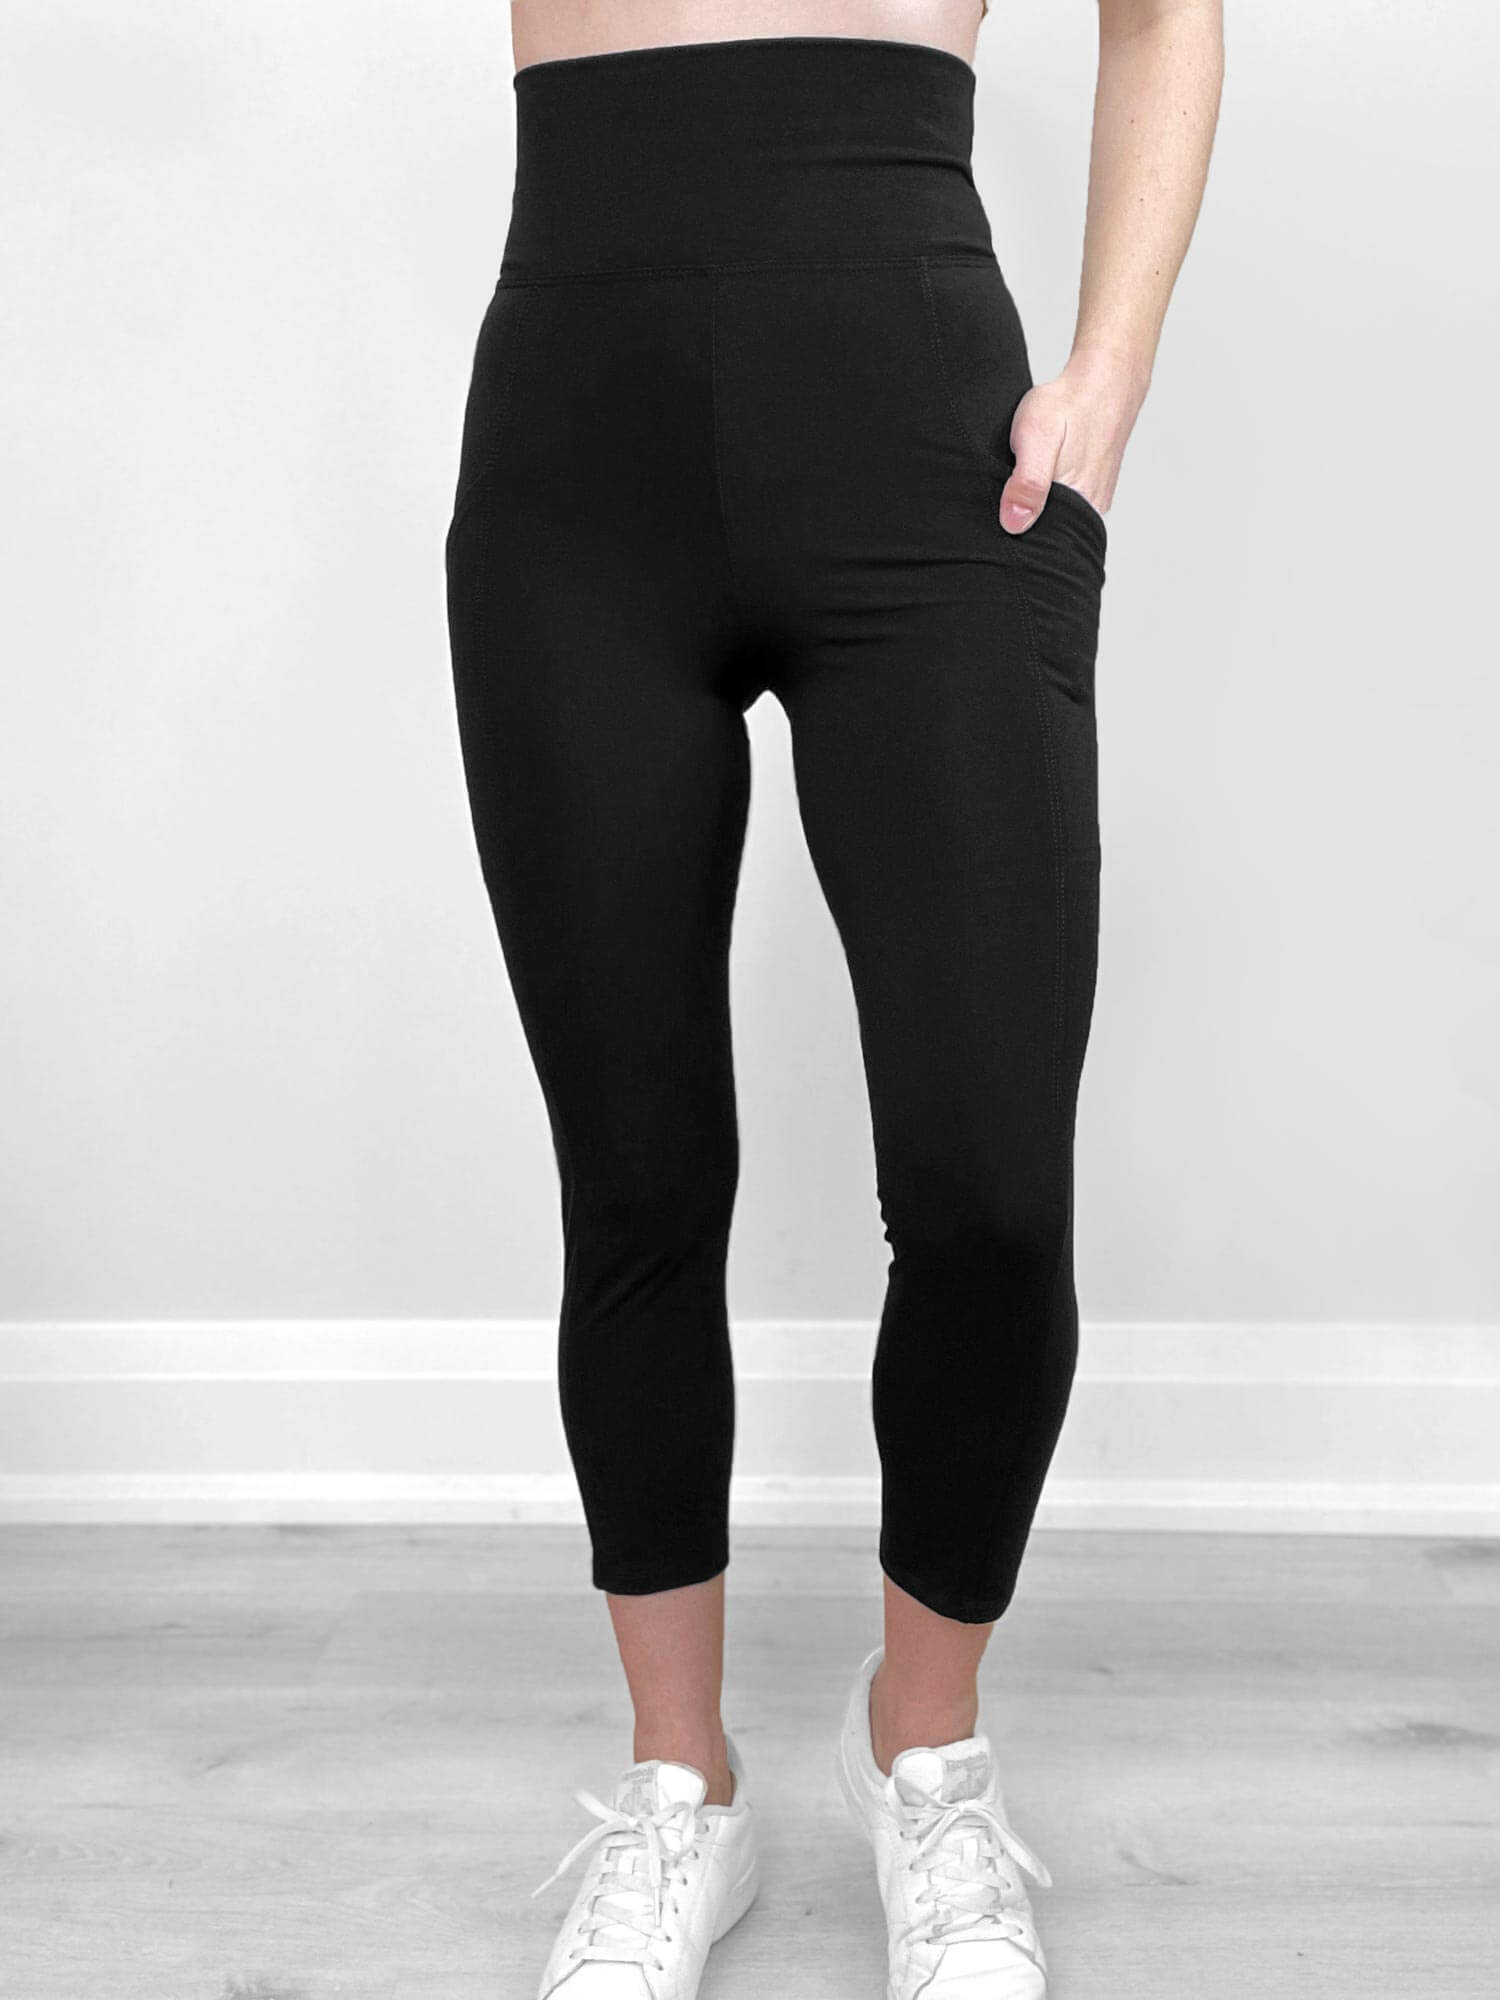 High Quality Activewear Capris With Pockets With High Waist, Hip